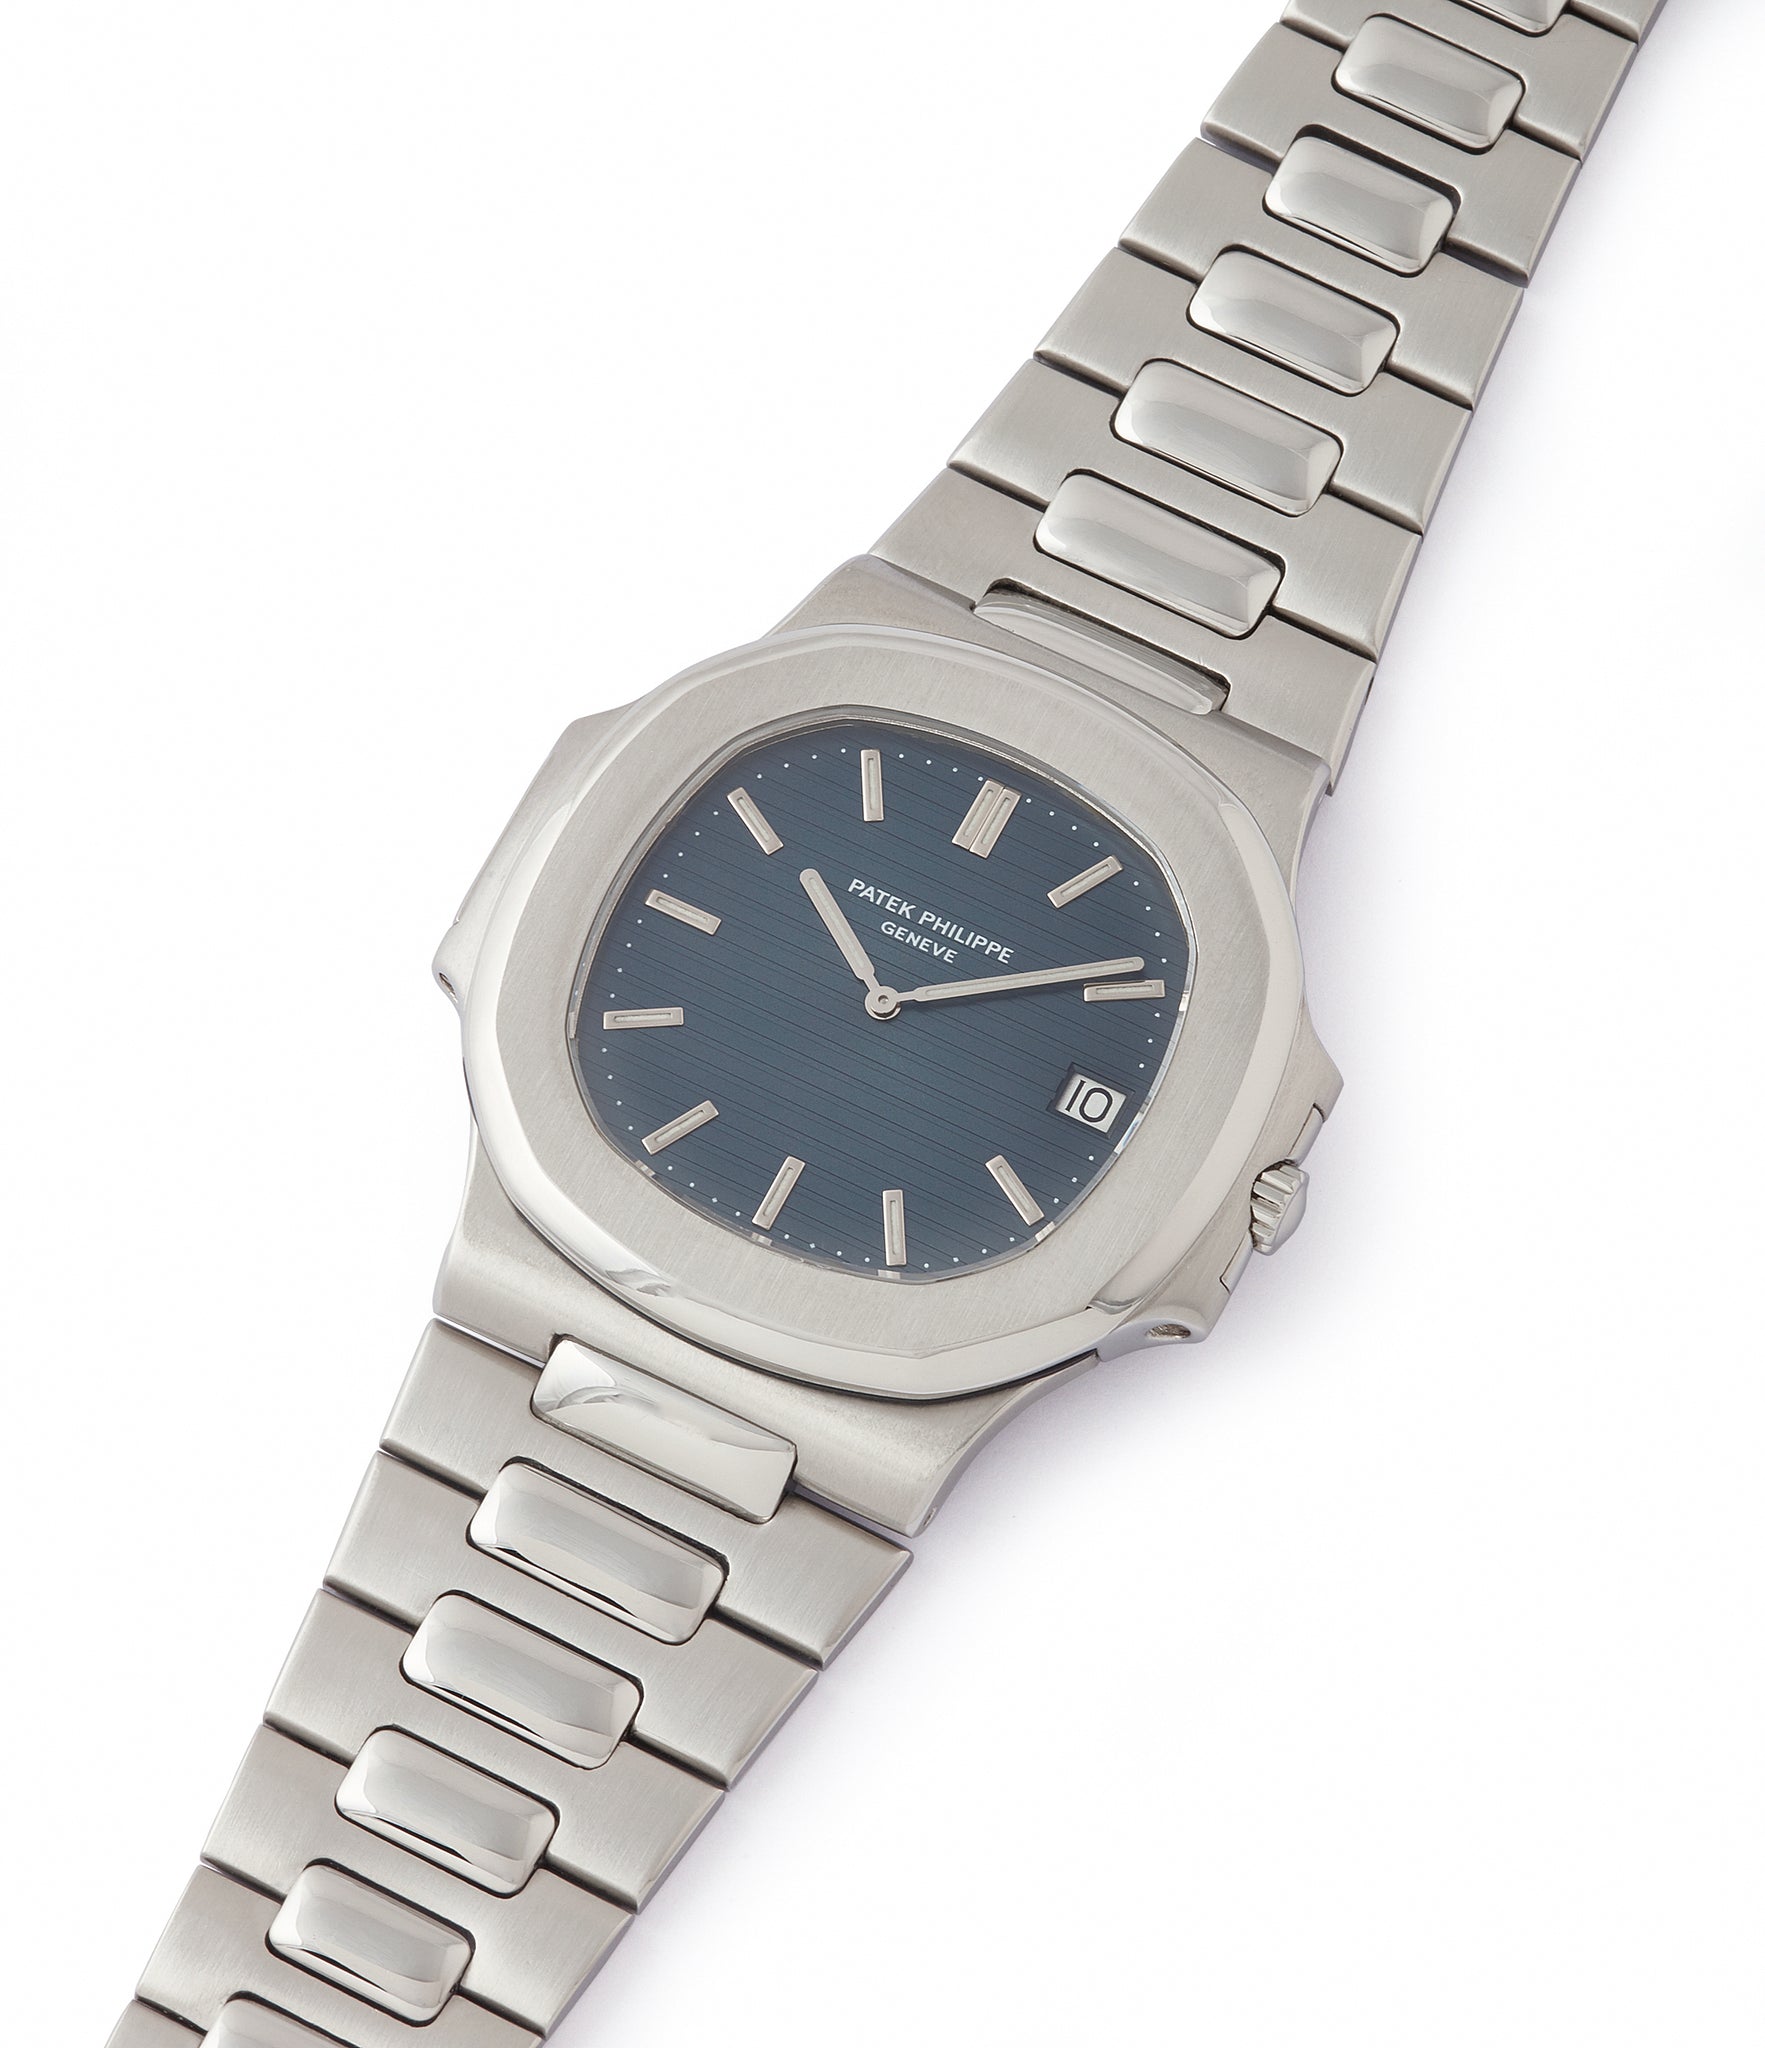 shop vintage Patek Philippe Nautilus 3700/001A steel sport watch full set for sale online at A Collected Man London UK specialist of rare vintage watches